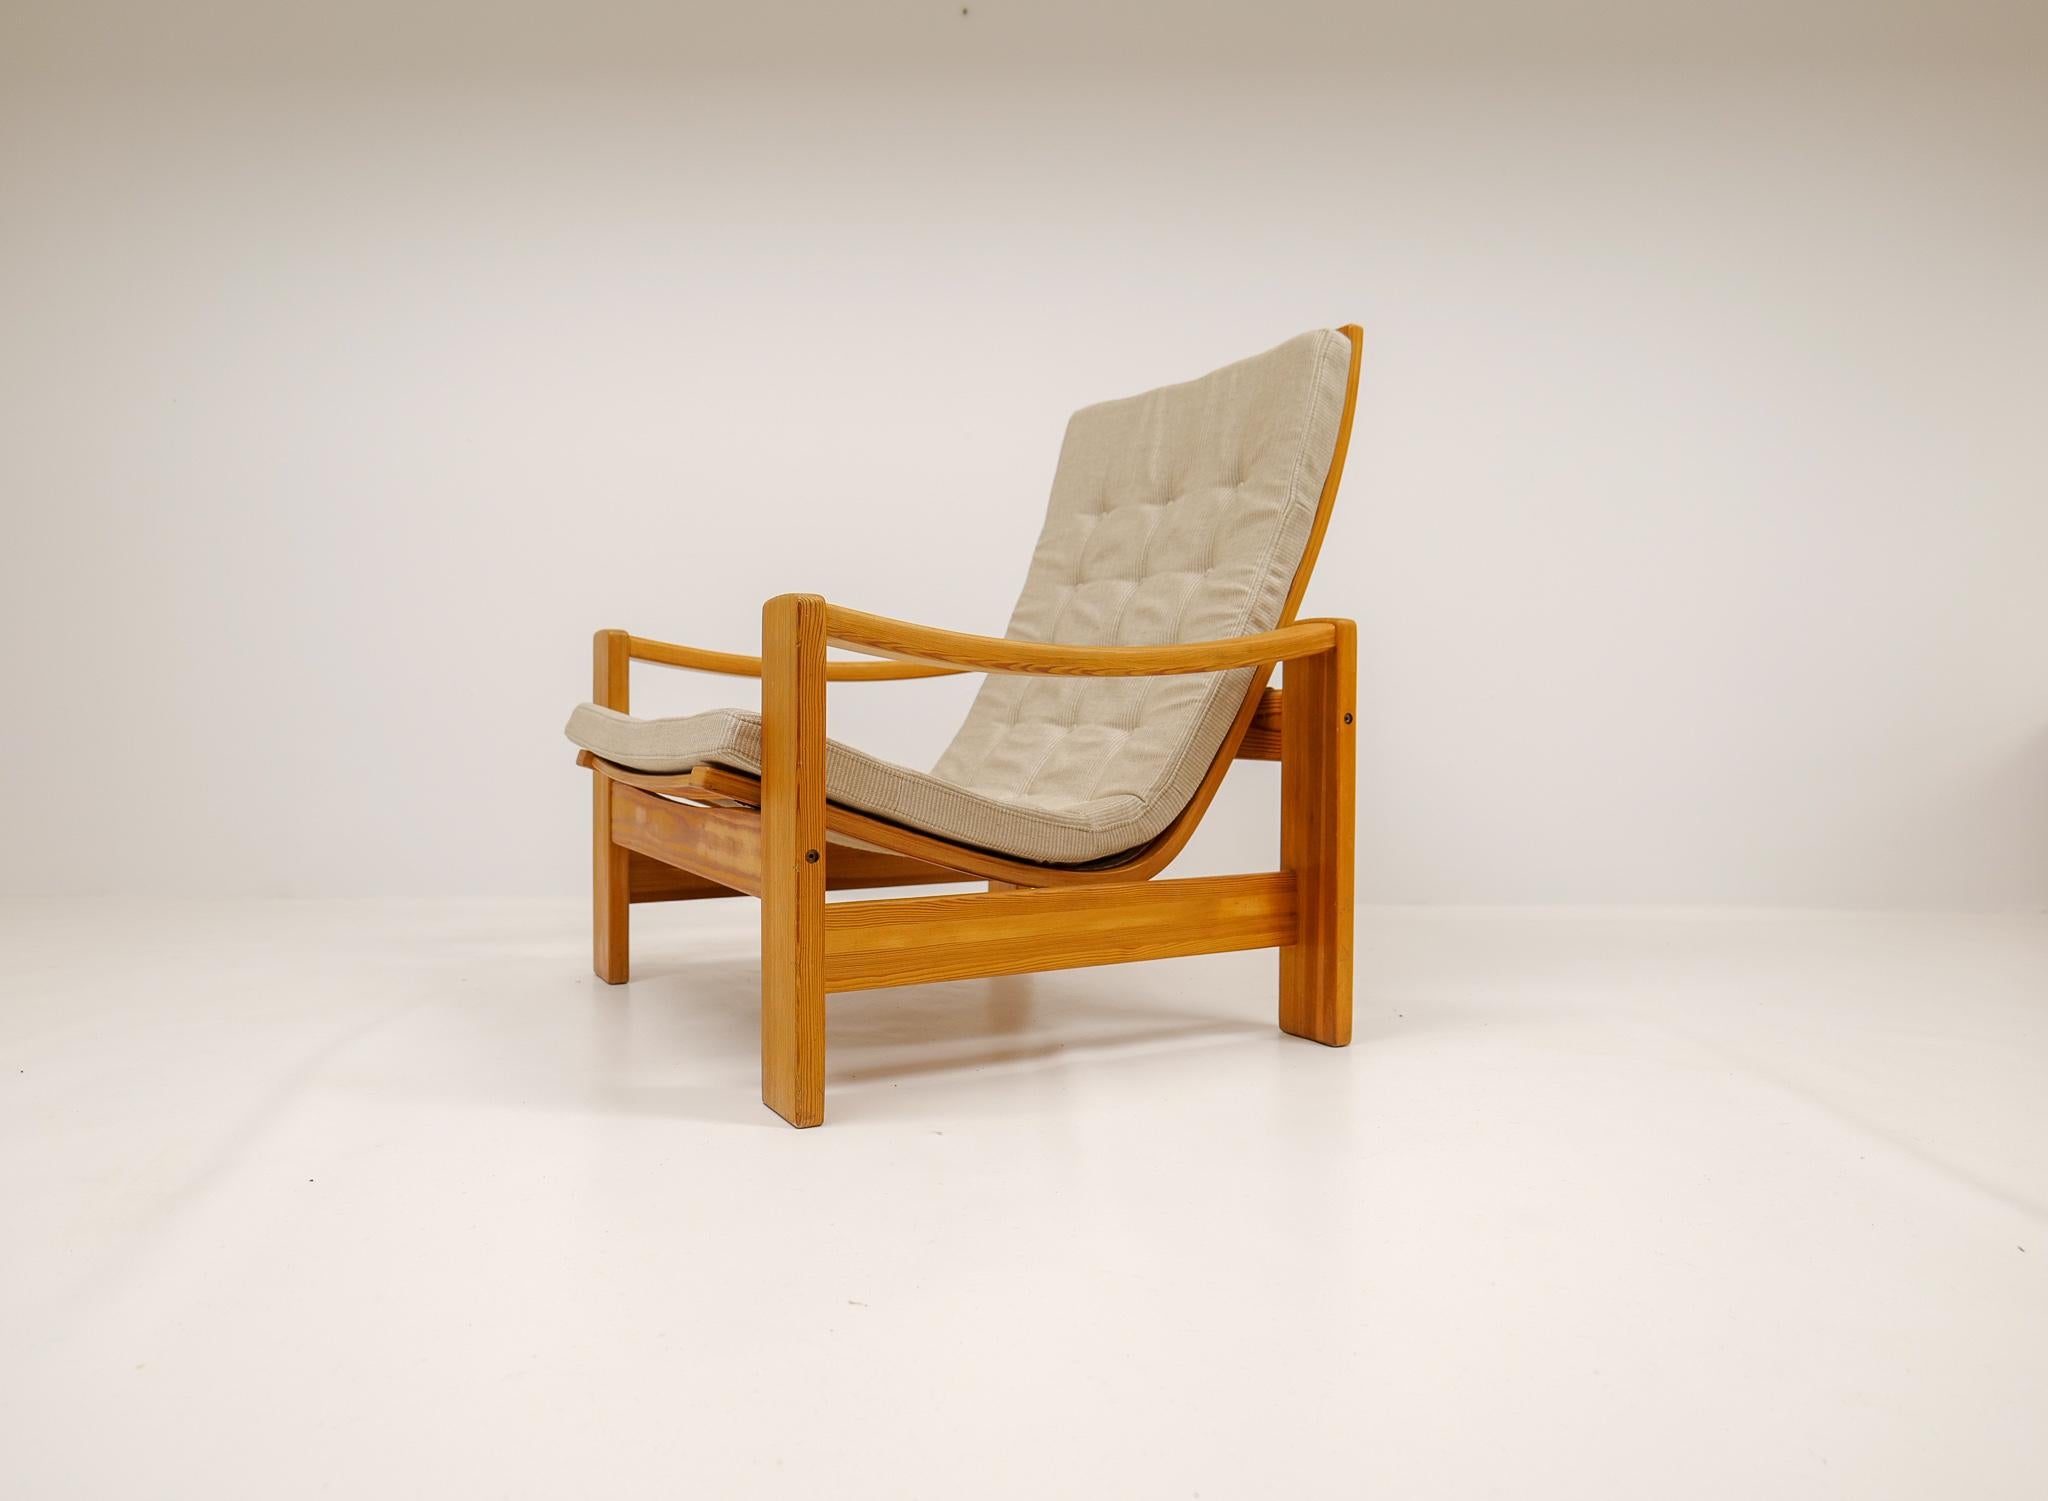 This solid pine lounge chair was designed by famous Swedish designer Yngve Ekström in 1970s and produced at Swedese. This one made in nicely rounded crafted pine with a newly reupholstered seat in fabric. 

Good vintage condition with small marks